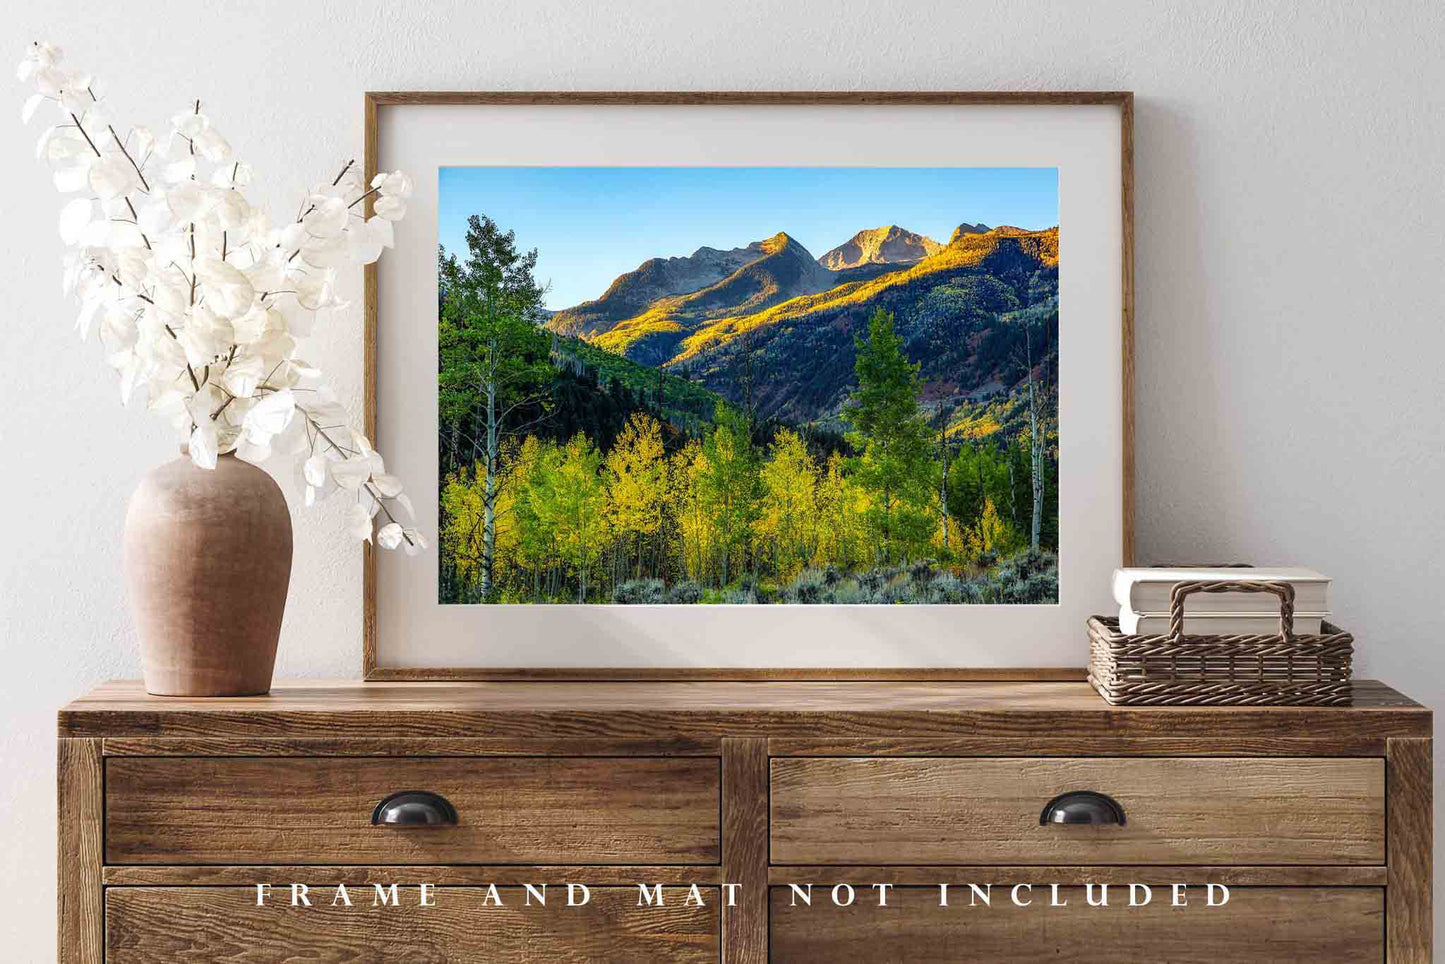 Rocky Mountain Picture - Fine Art Landscape Photography Print of Mountain in Golden Sunlight on Autumn Day in Colorado Wall Art Photo Decor